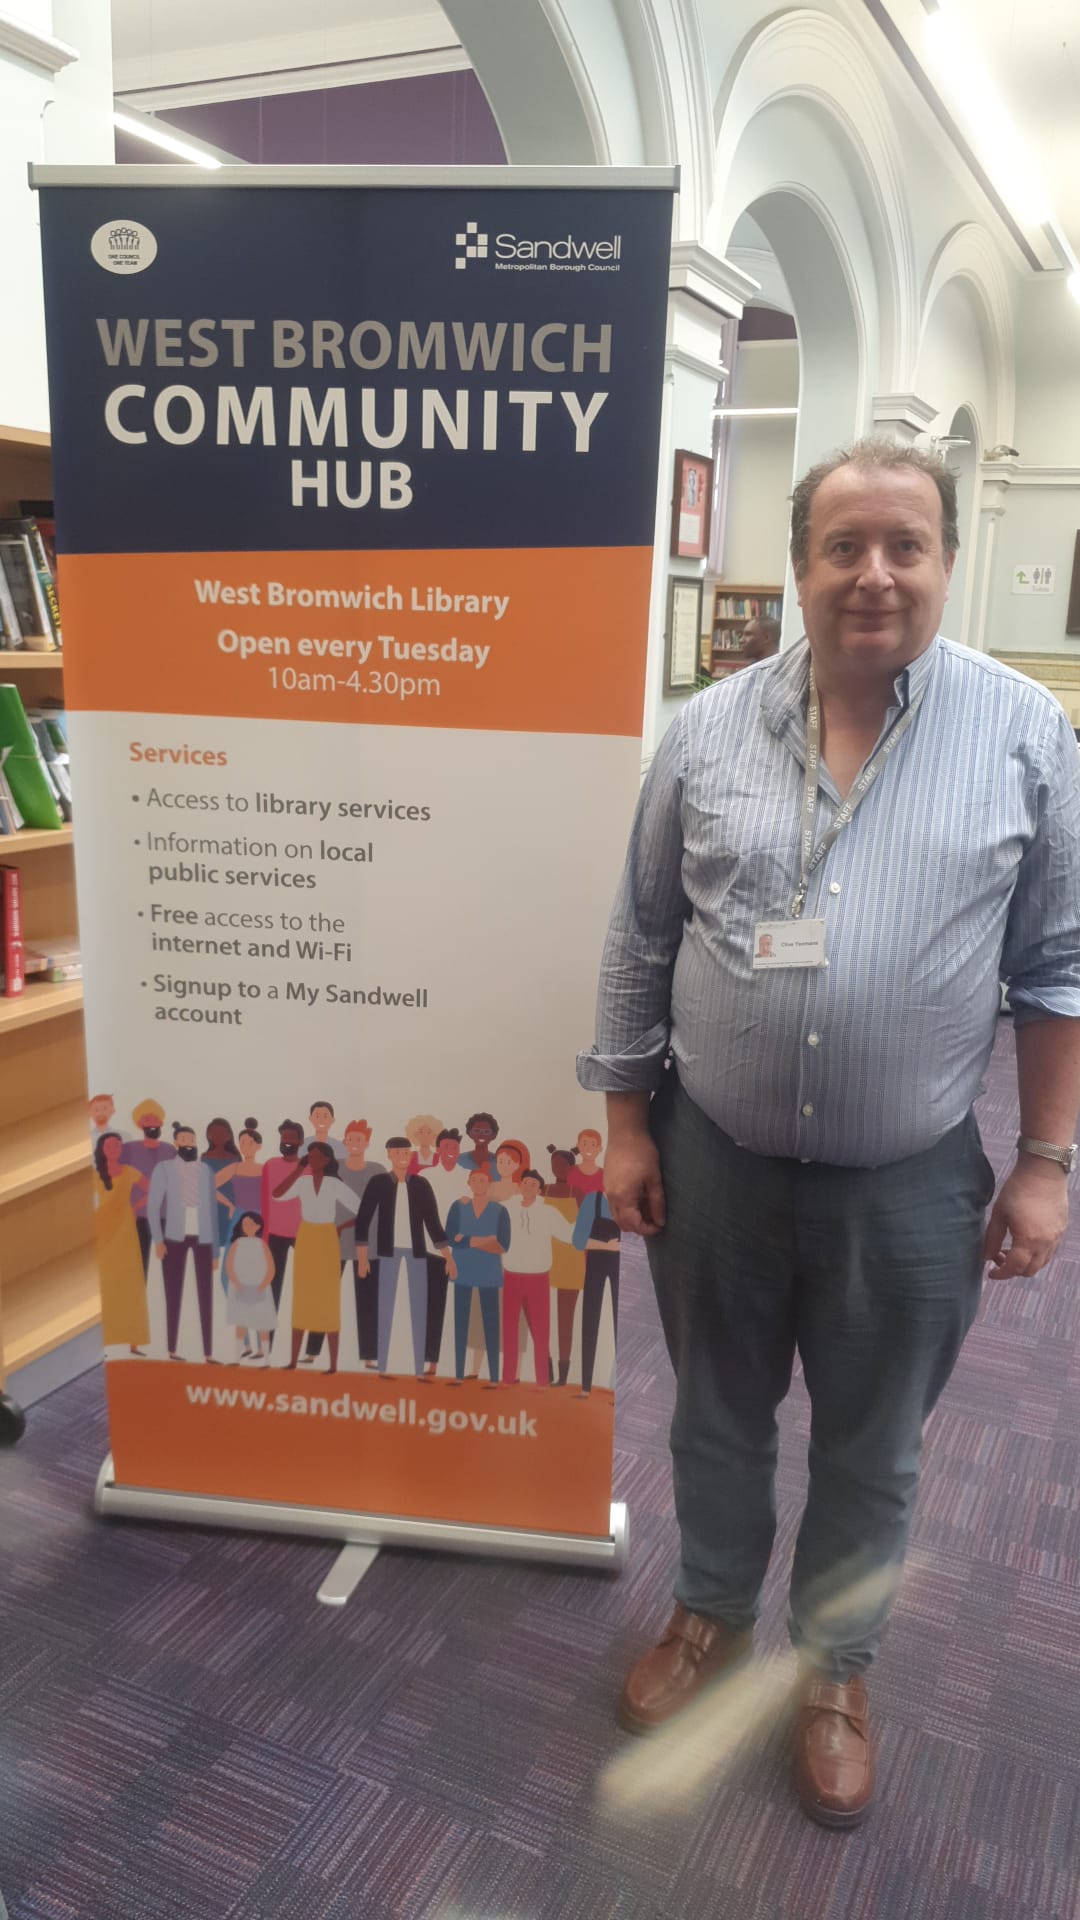 West Bromwich Community Hub services in West Bromwich Library! Please visit us for any enquiries!